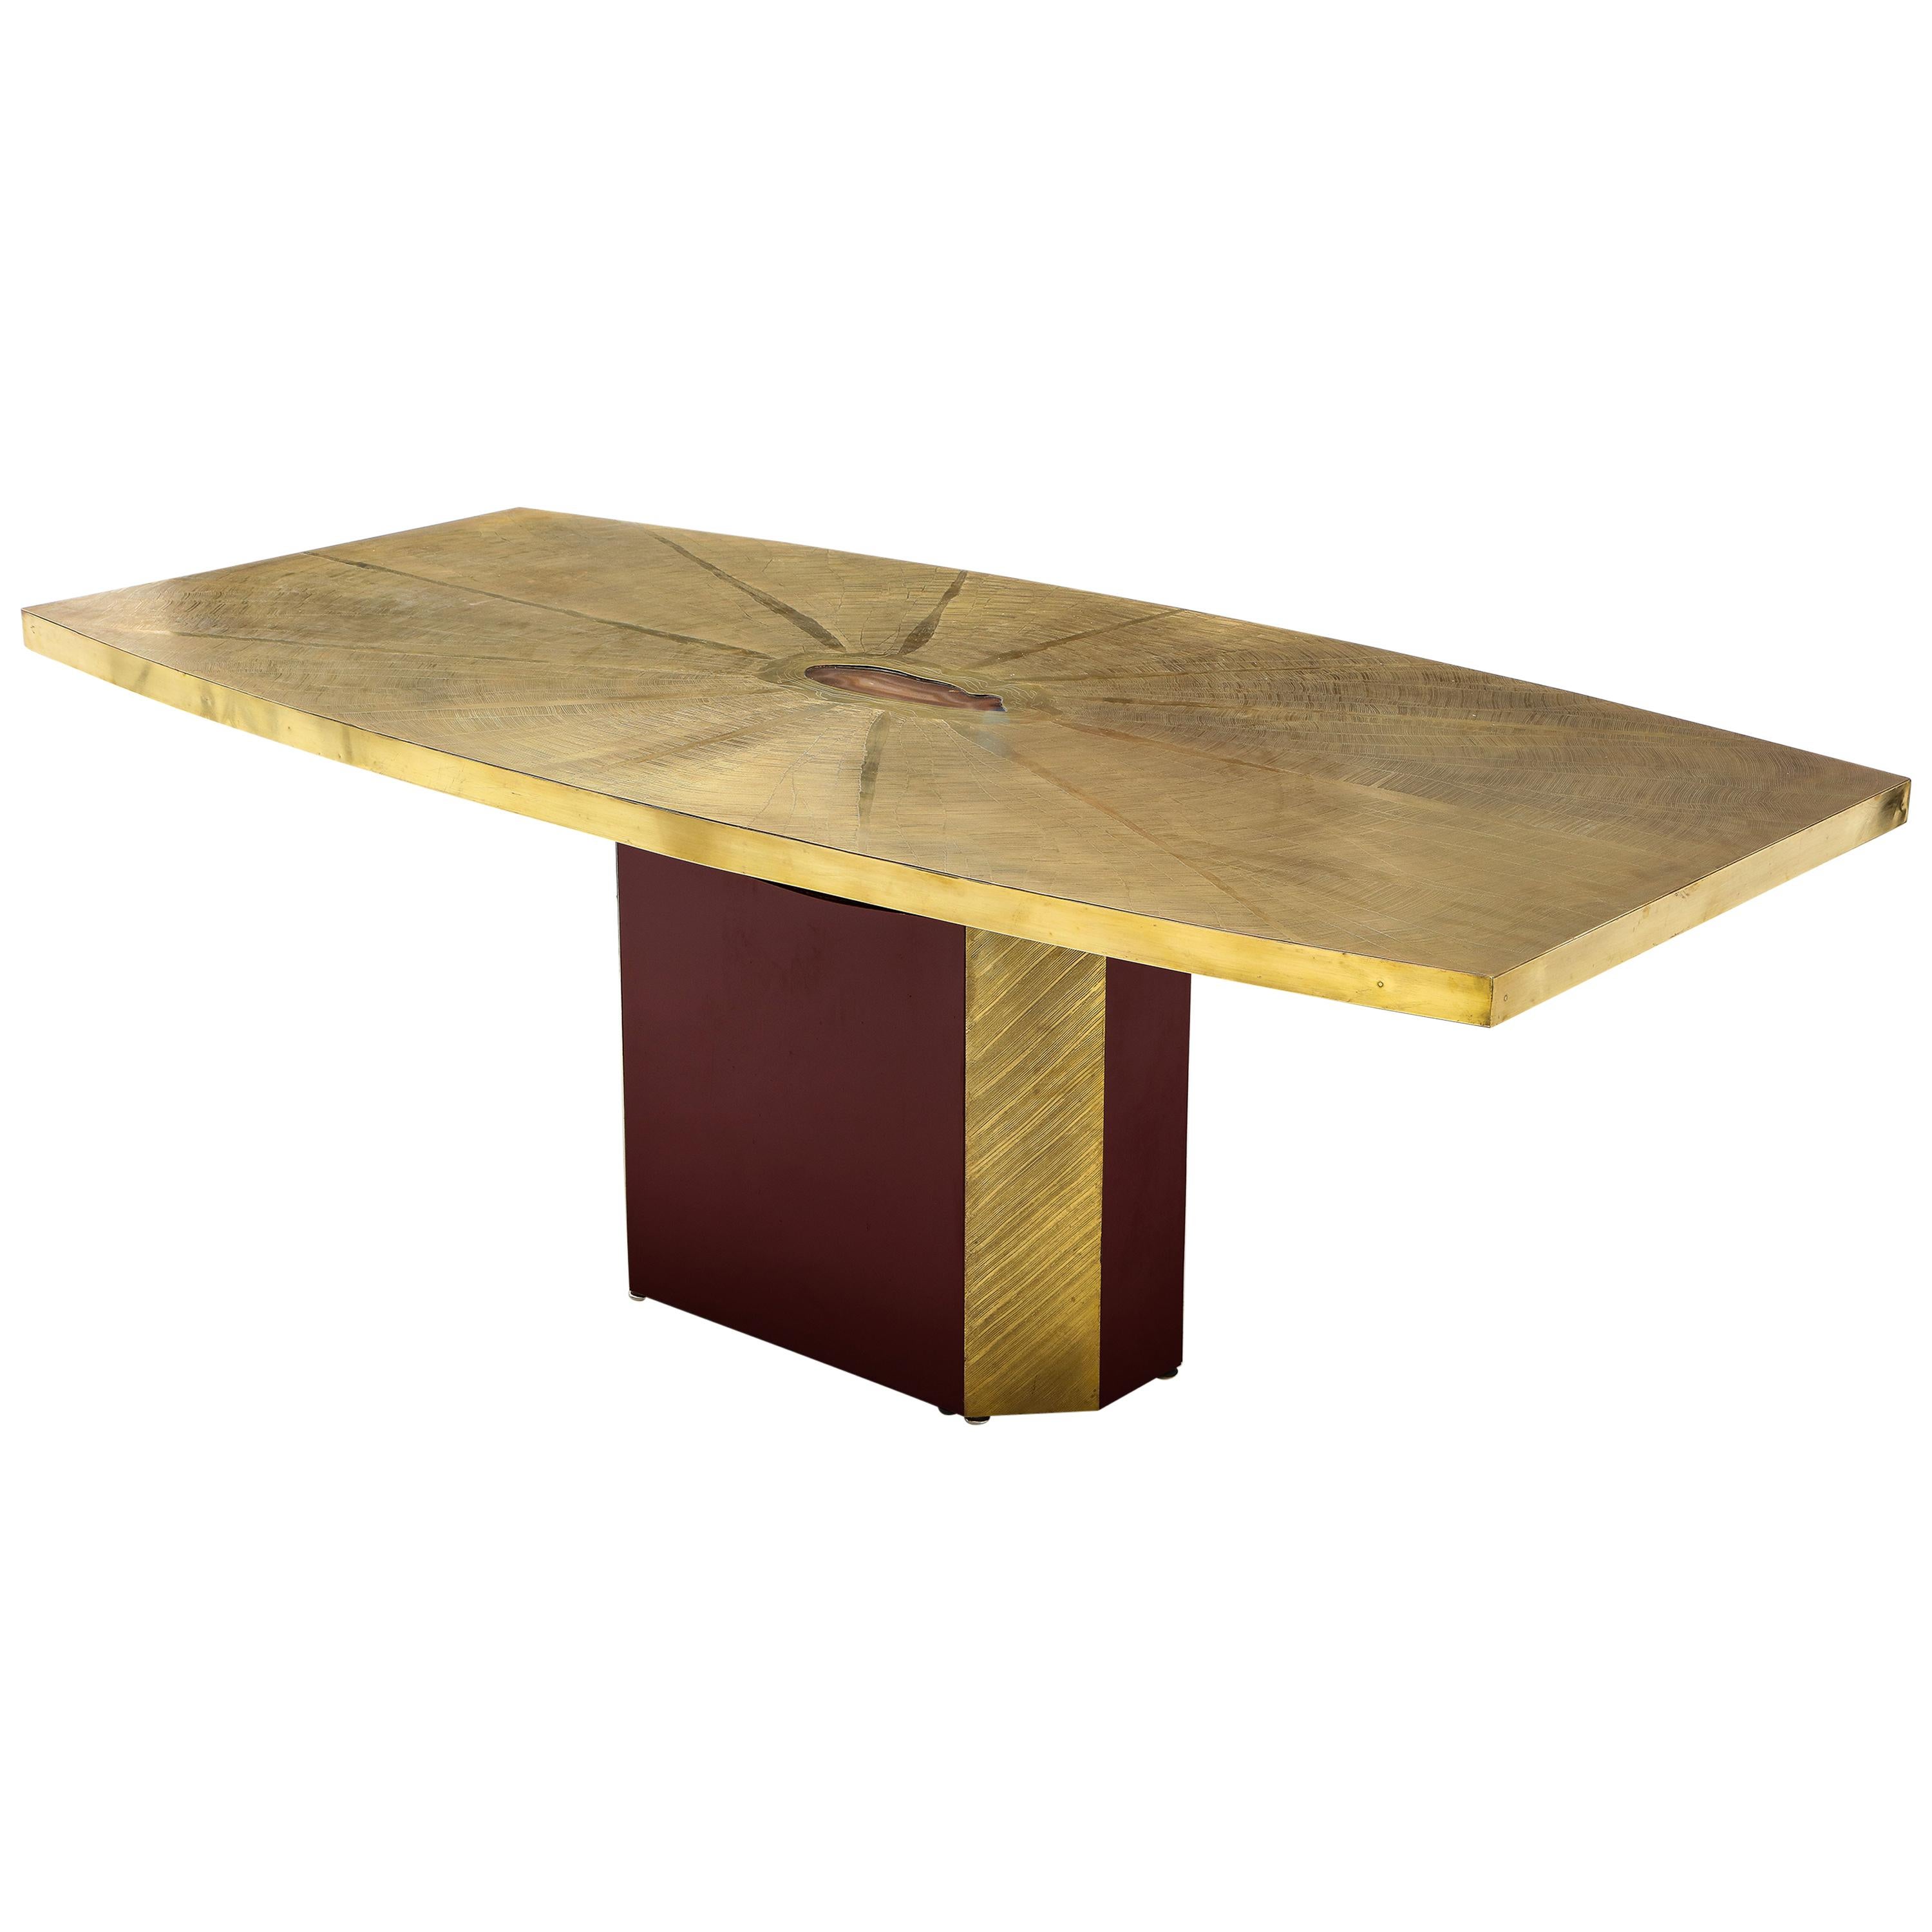 Rare and Important Acid Etched Brass Dining Table by Paco Rabanne For Sale